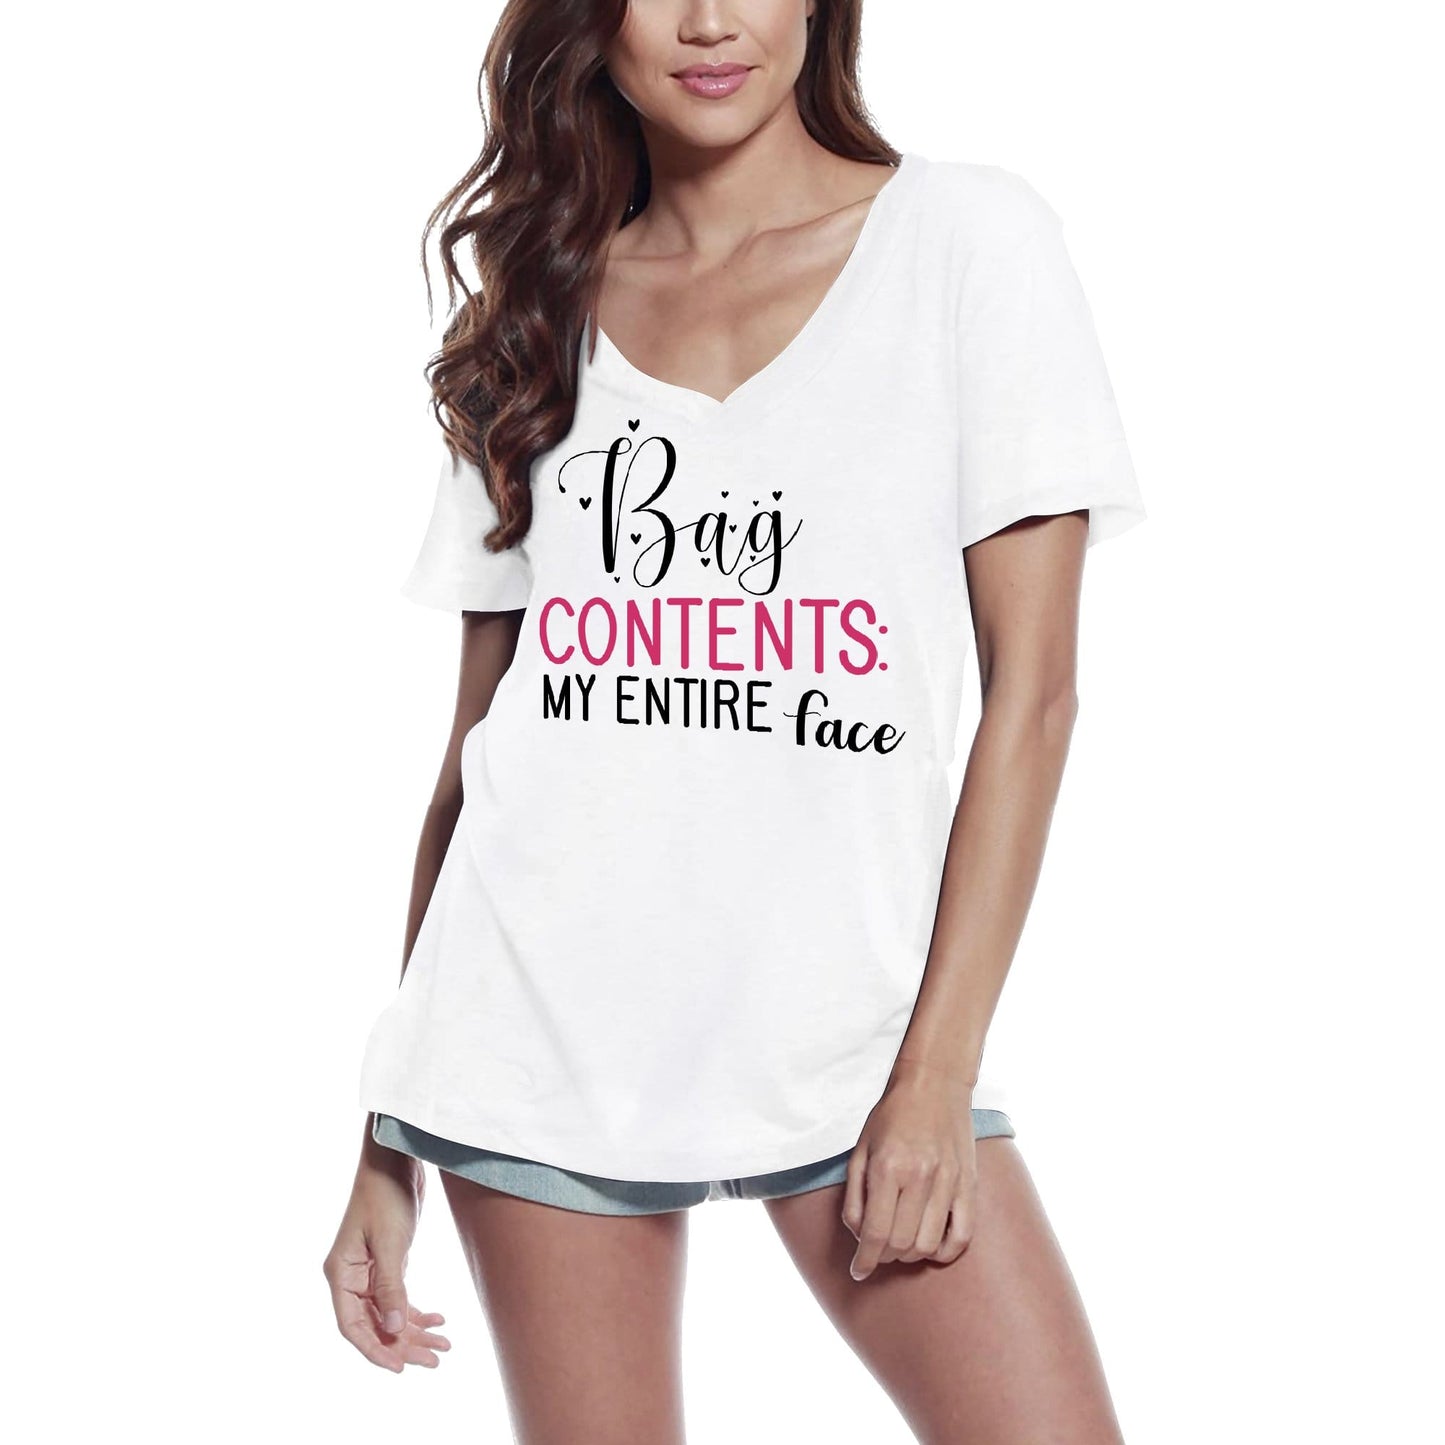 ULTRABASIC Women's Novelty T-Shirt Bag Contents My Entire Face - Make Up Quote